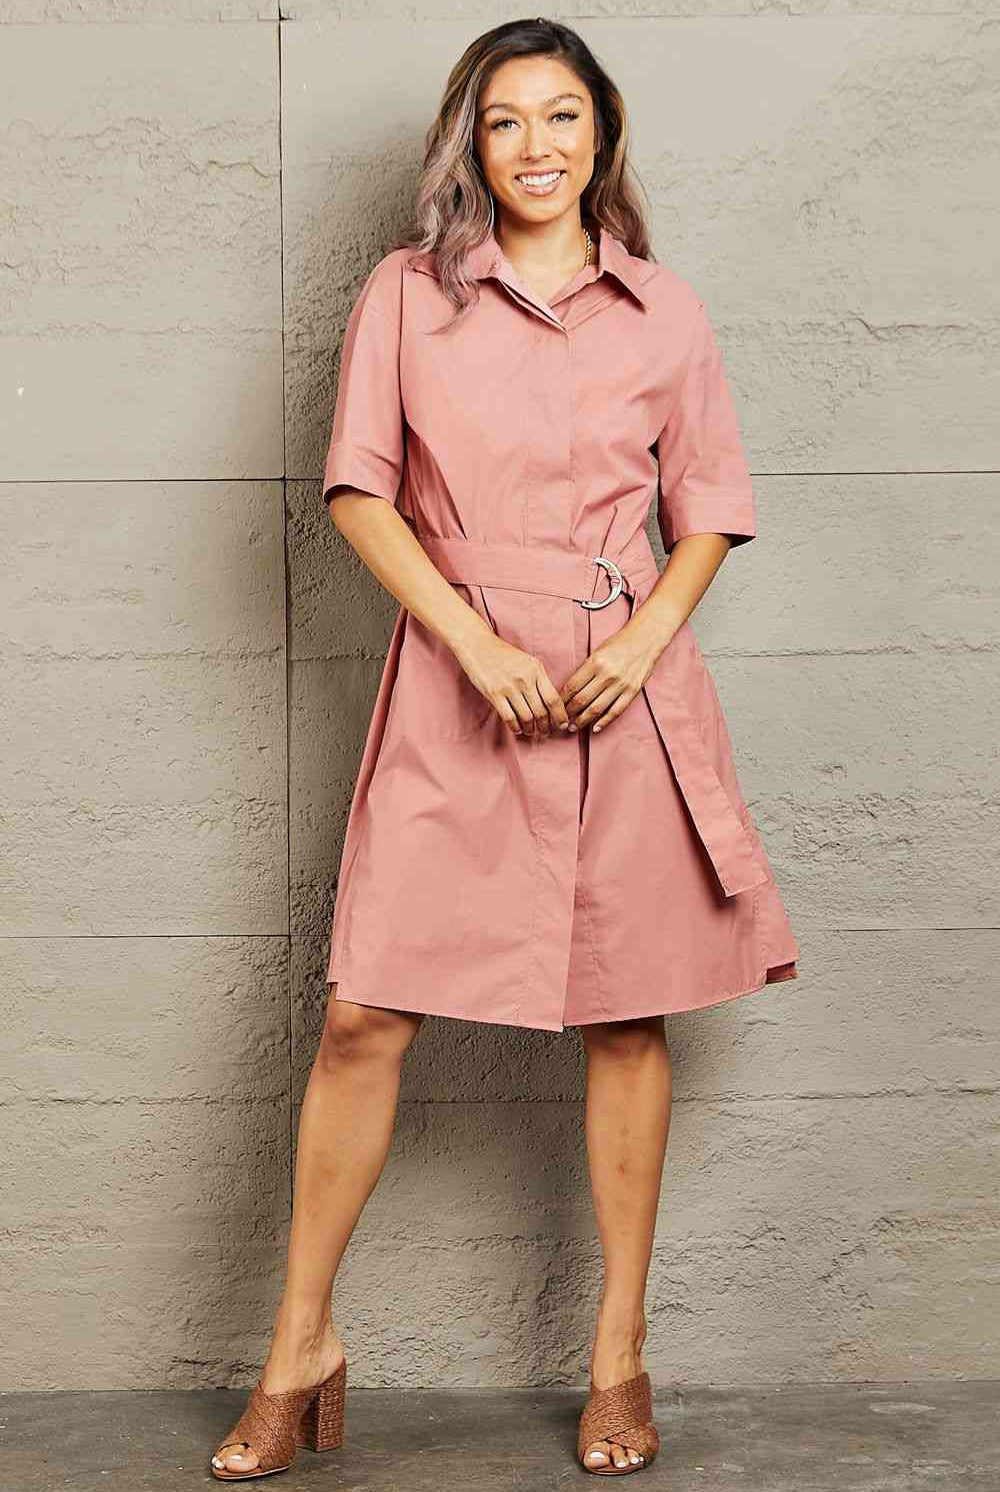 Tan Petal Dew Half Sleeve Collared Dress with Pockets Clothing